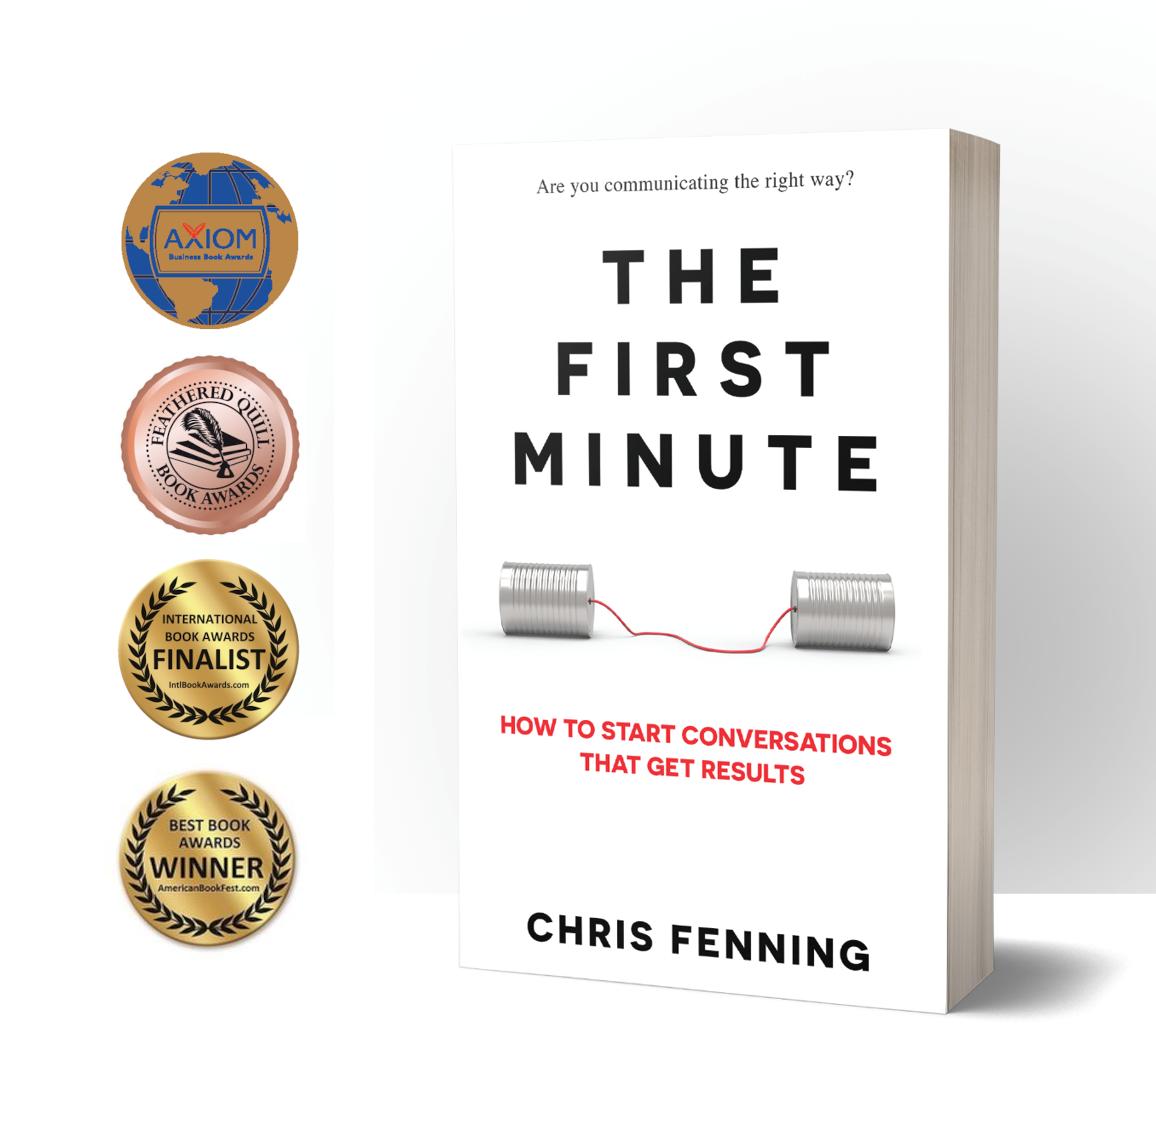 The_First_Minute_book_by_Chris_Fenningavdfh.p...